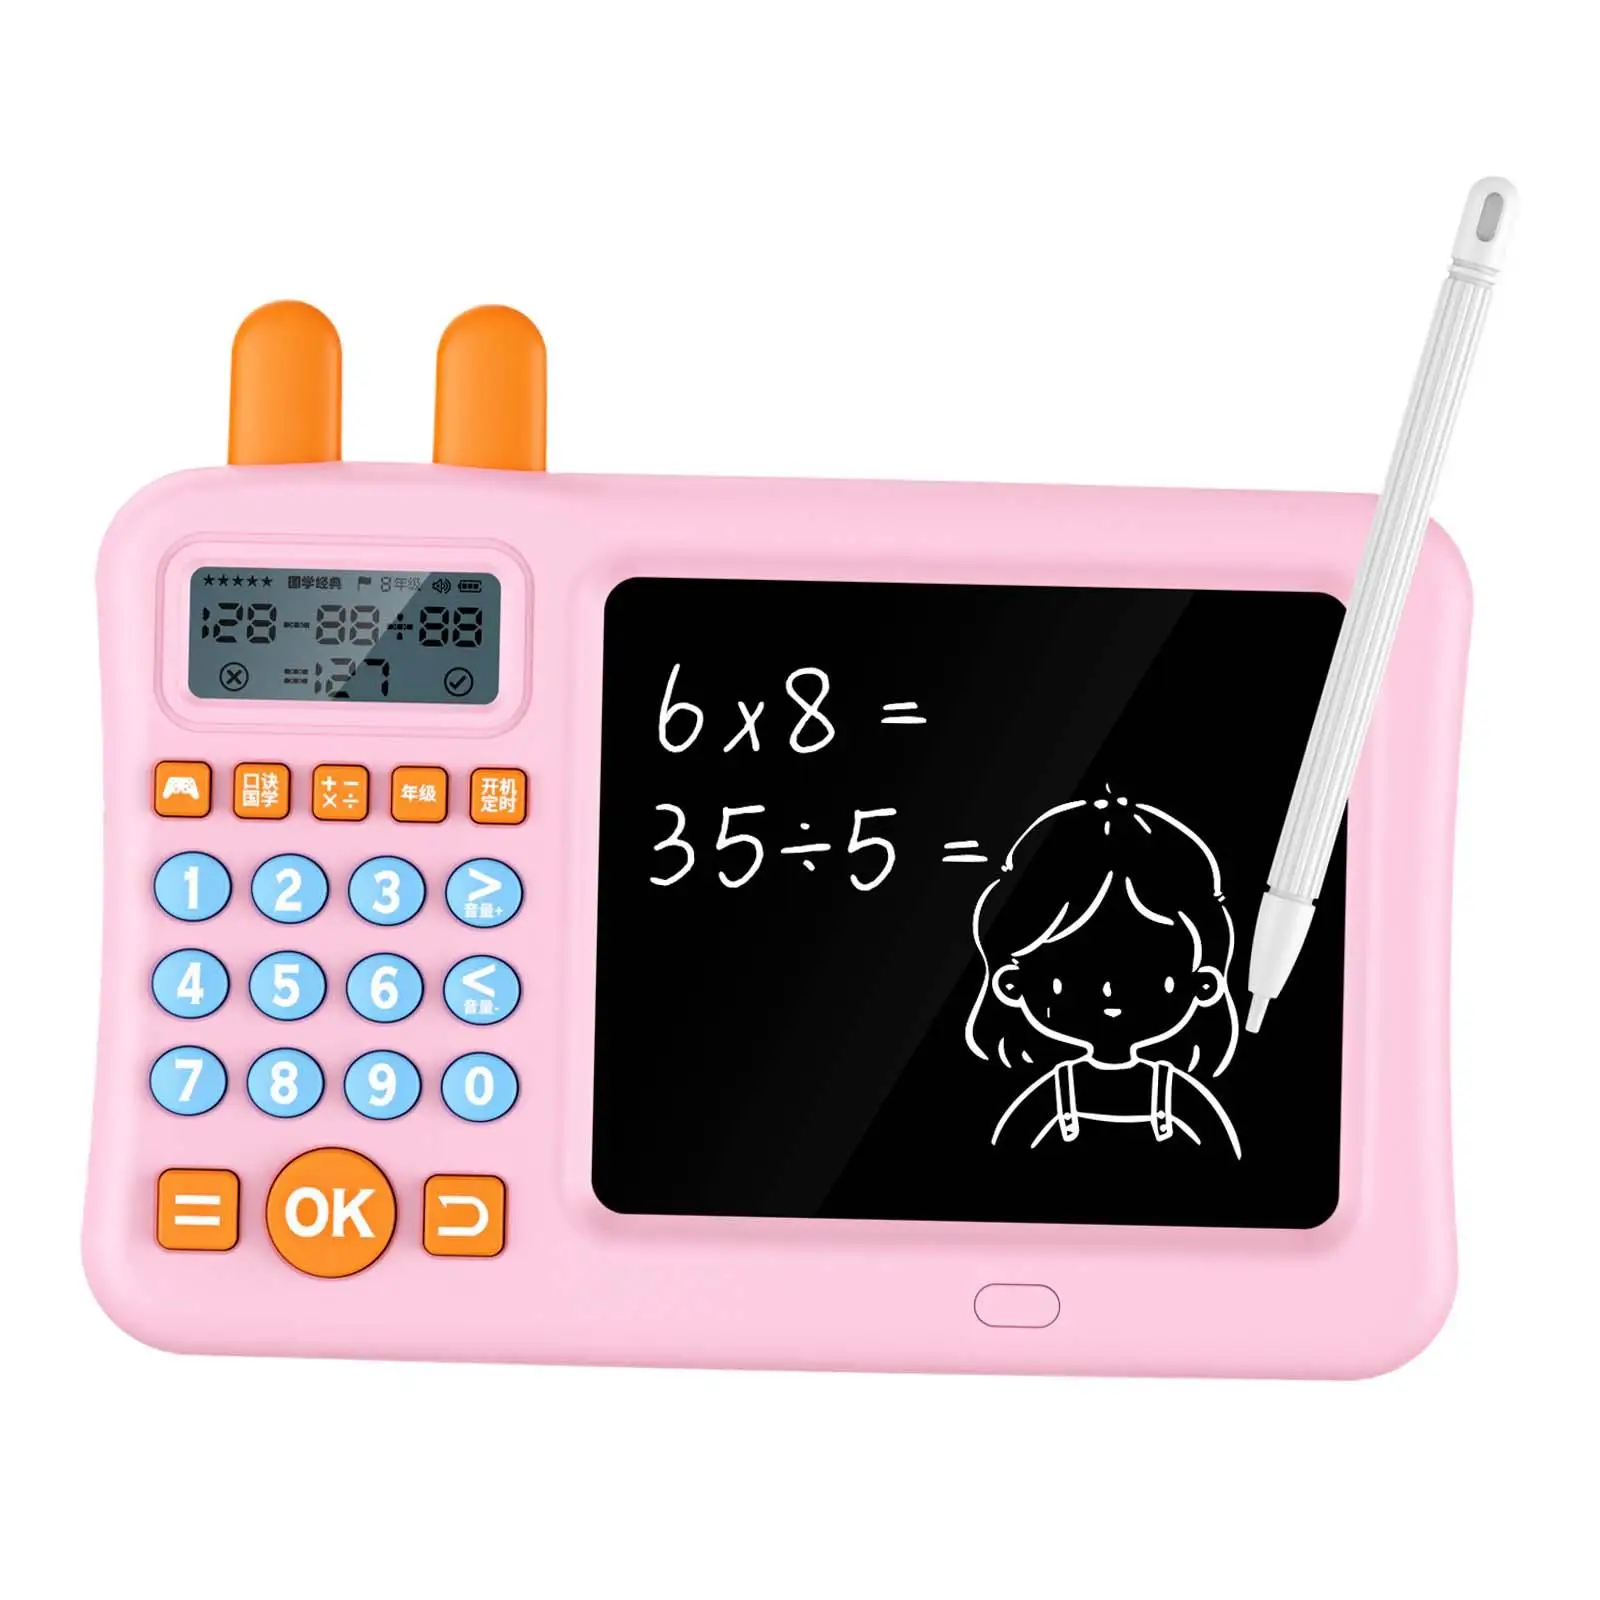 Maths Teaching Calculator Teaching Aids Addition Subtraction Multiplication Division Preschool Learning Toy for Children Gifts